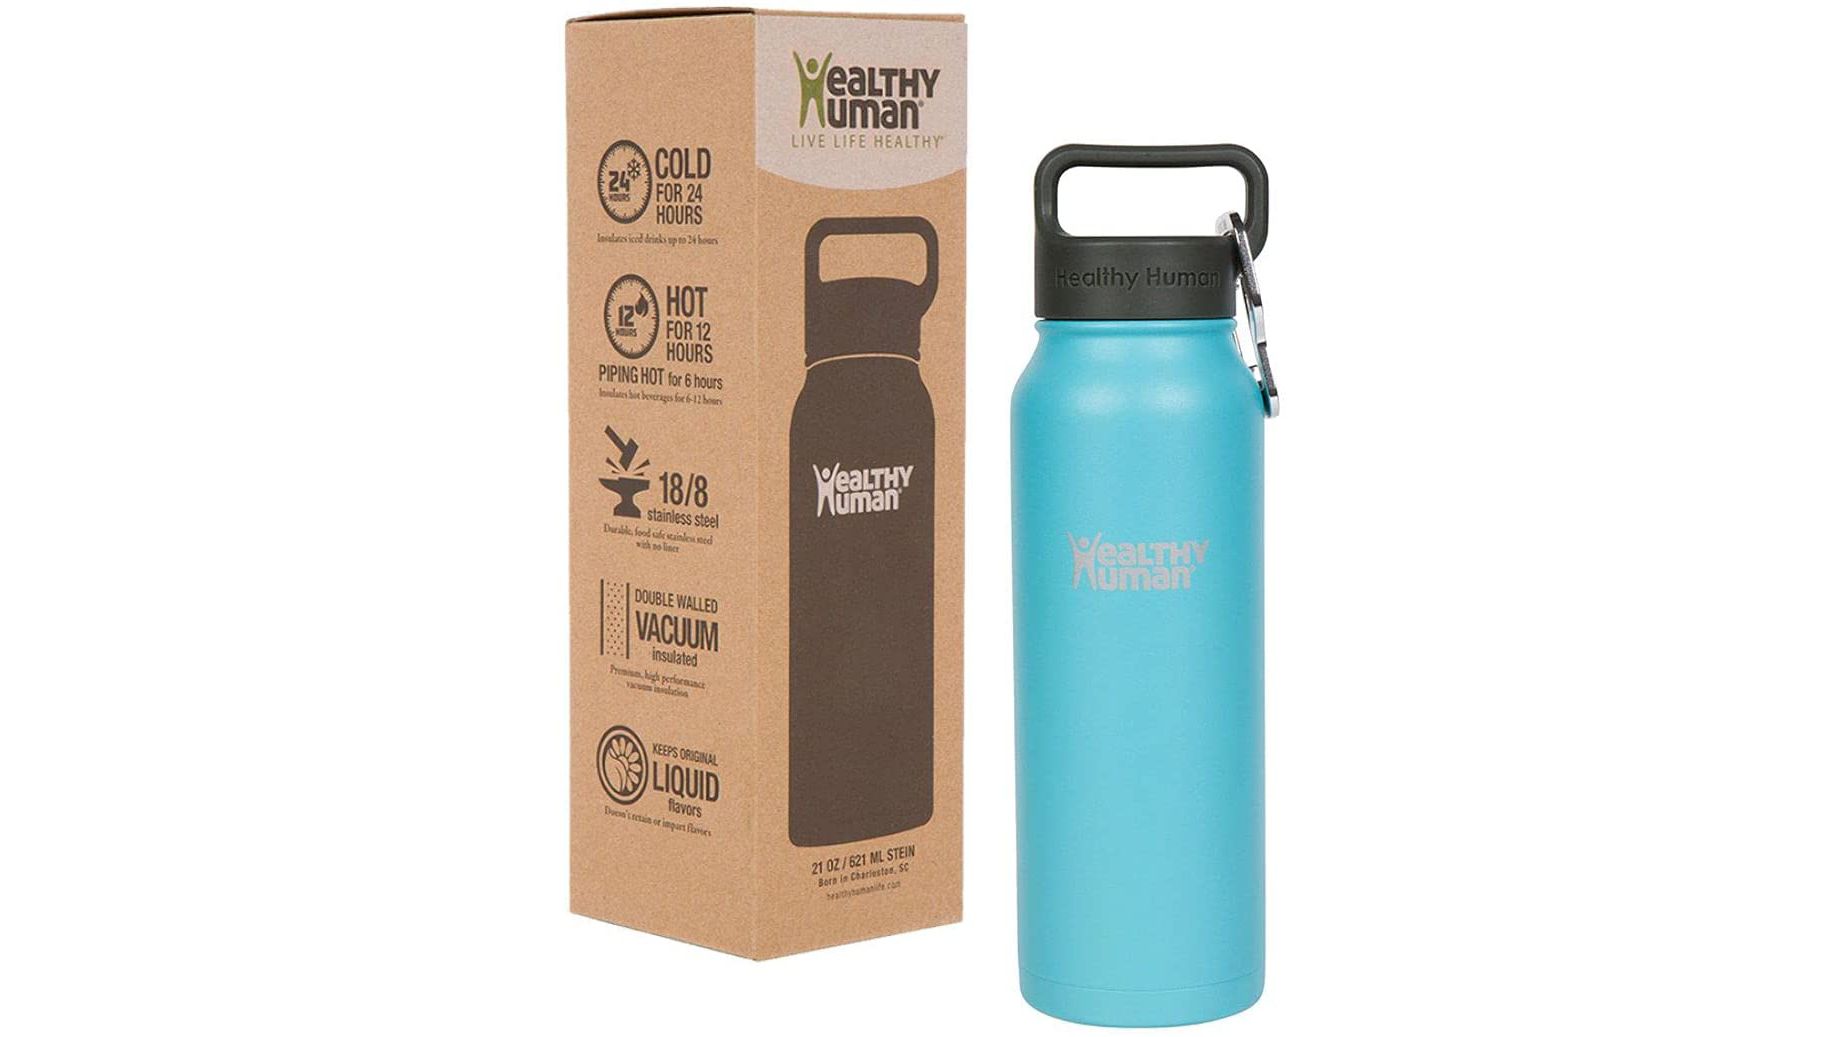  24Bottles Thermal Water Bottle, Reusable Stainless Steel  Thermos Bottle BPA Free, 24Hours Cold 12Hours Hot, Climate Bottle